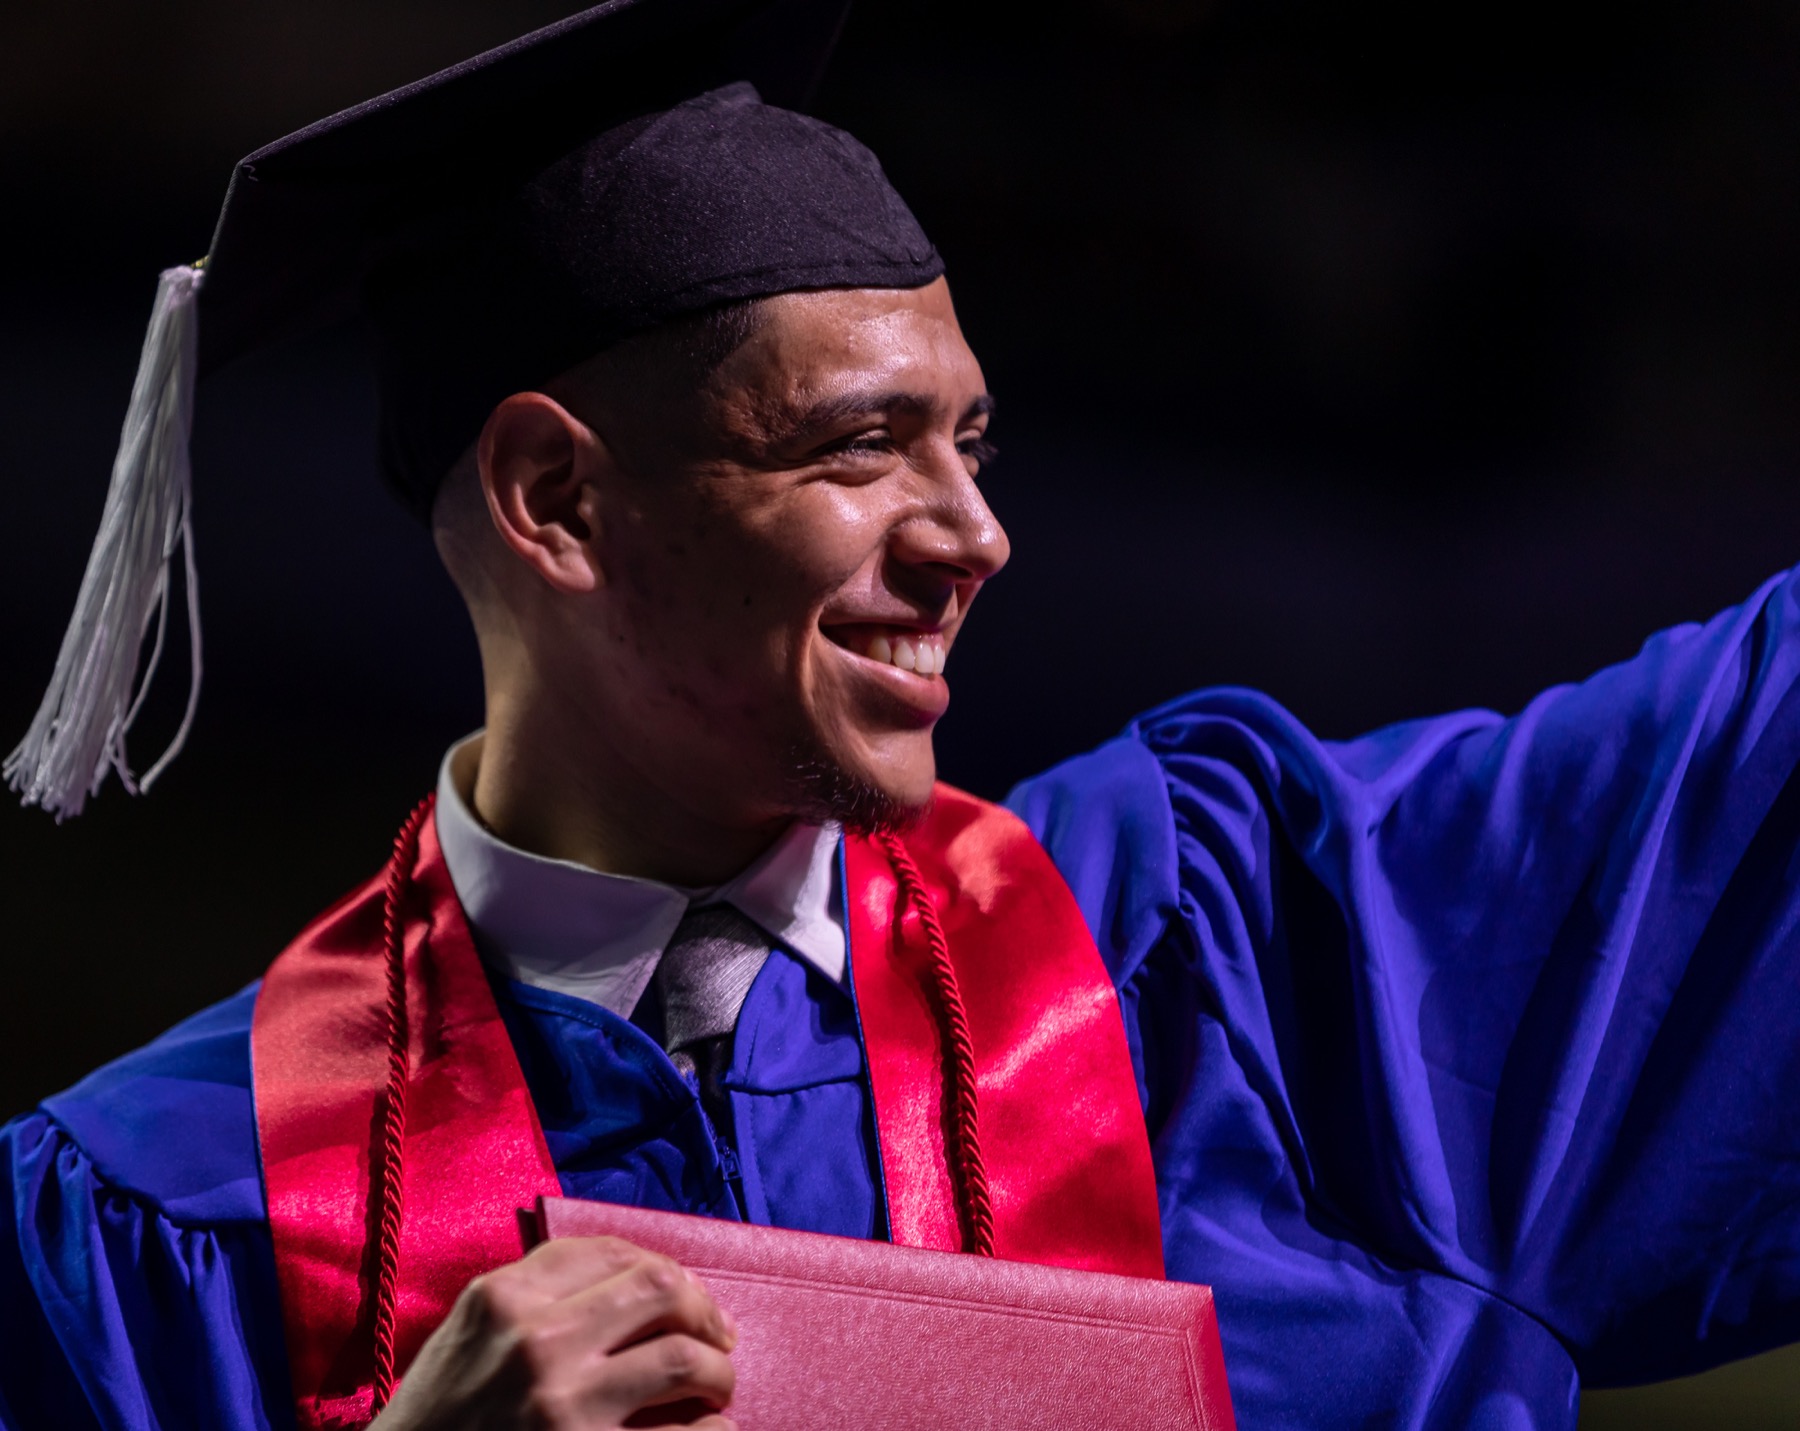 A graduate waved to his family after receiving his diploma.